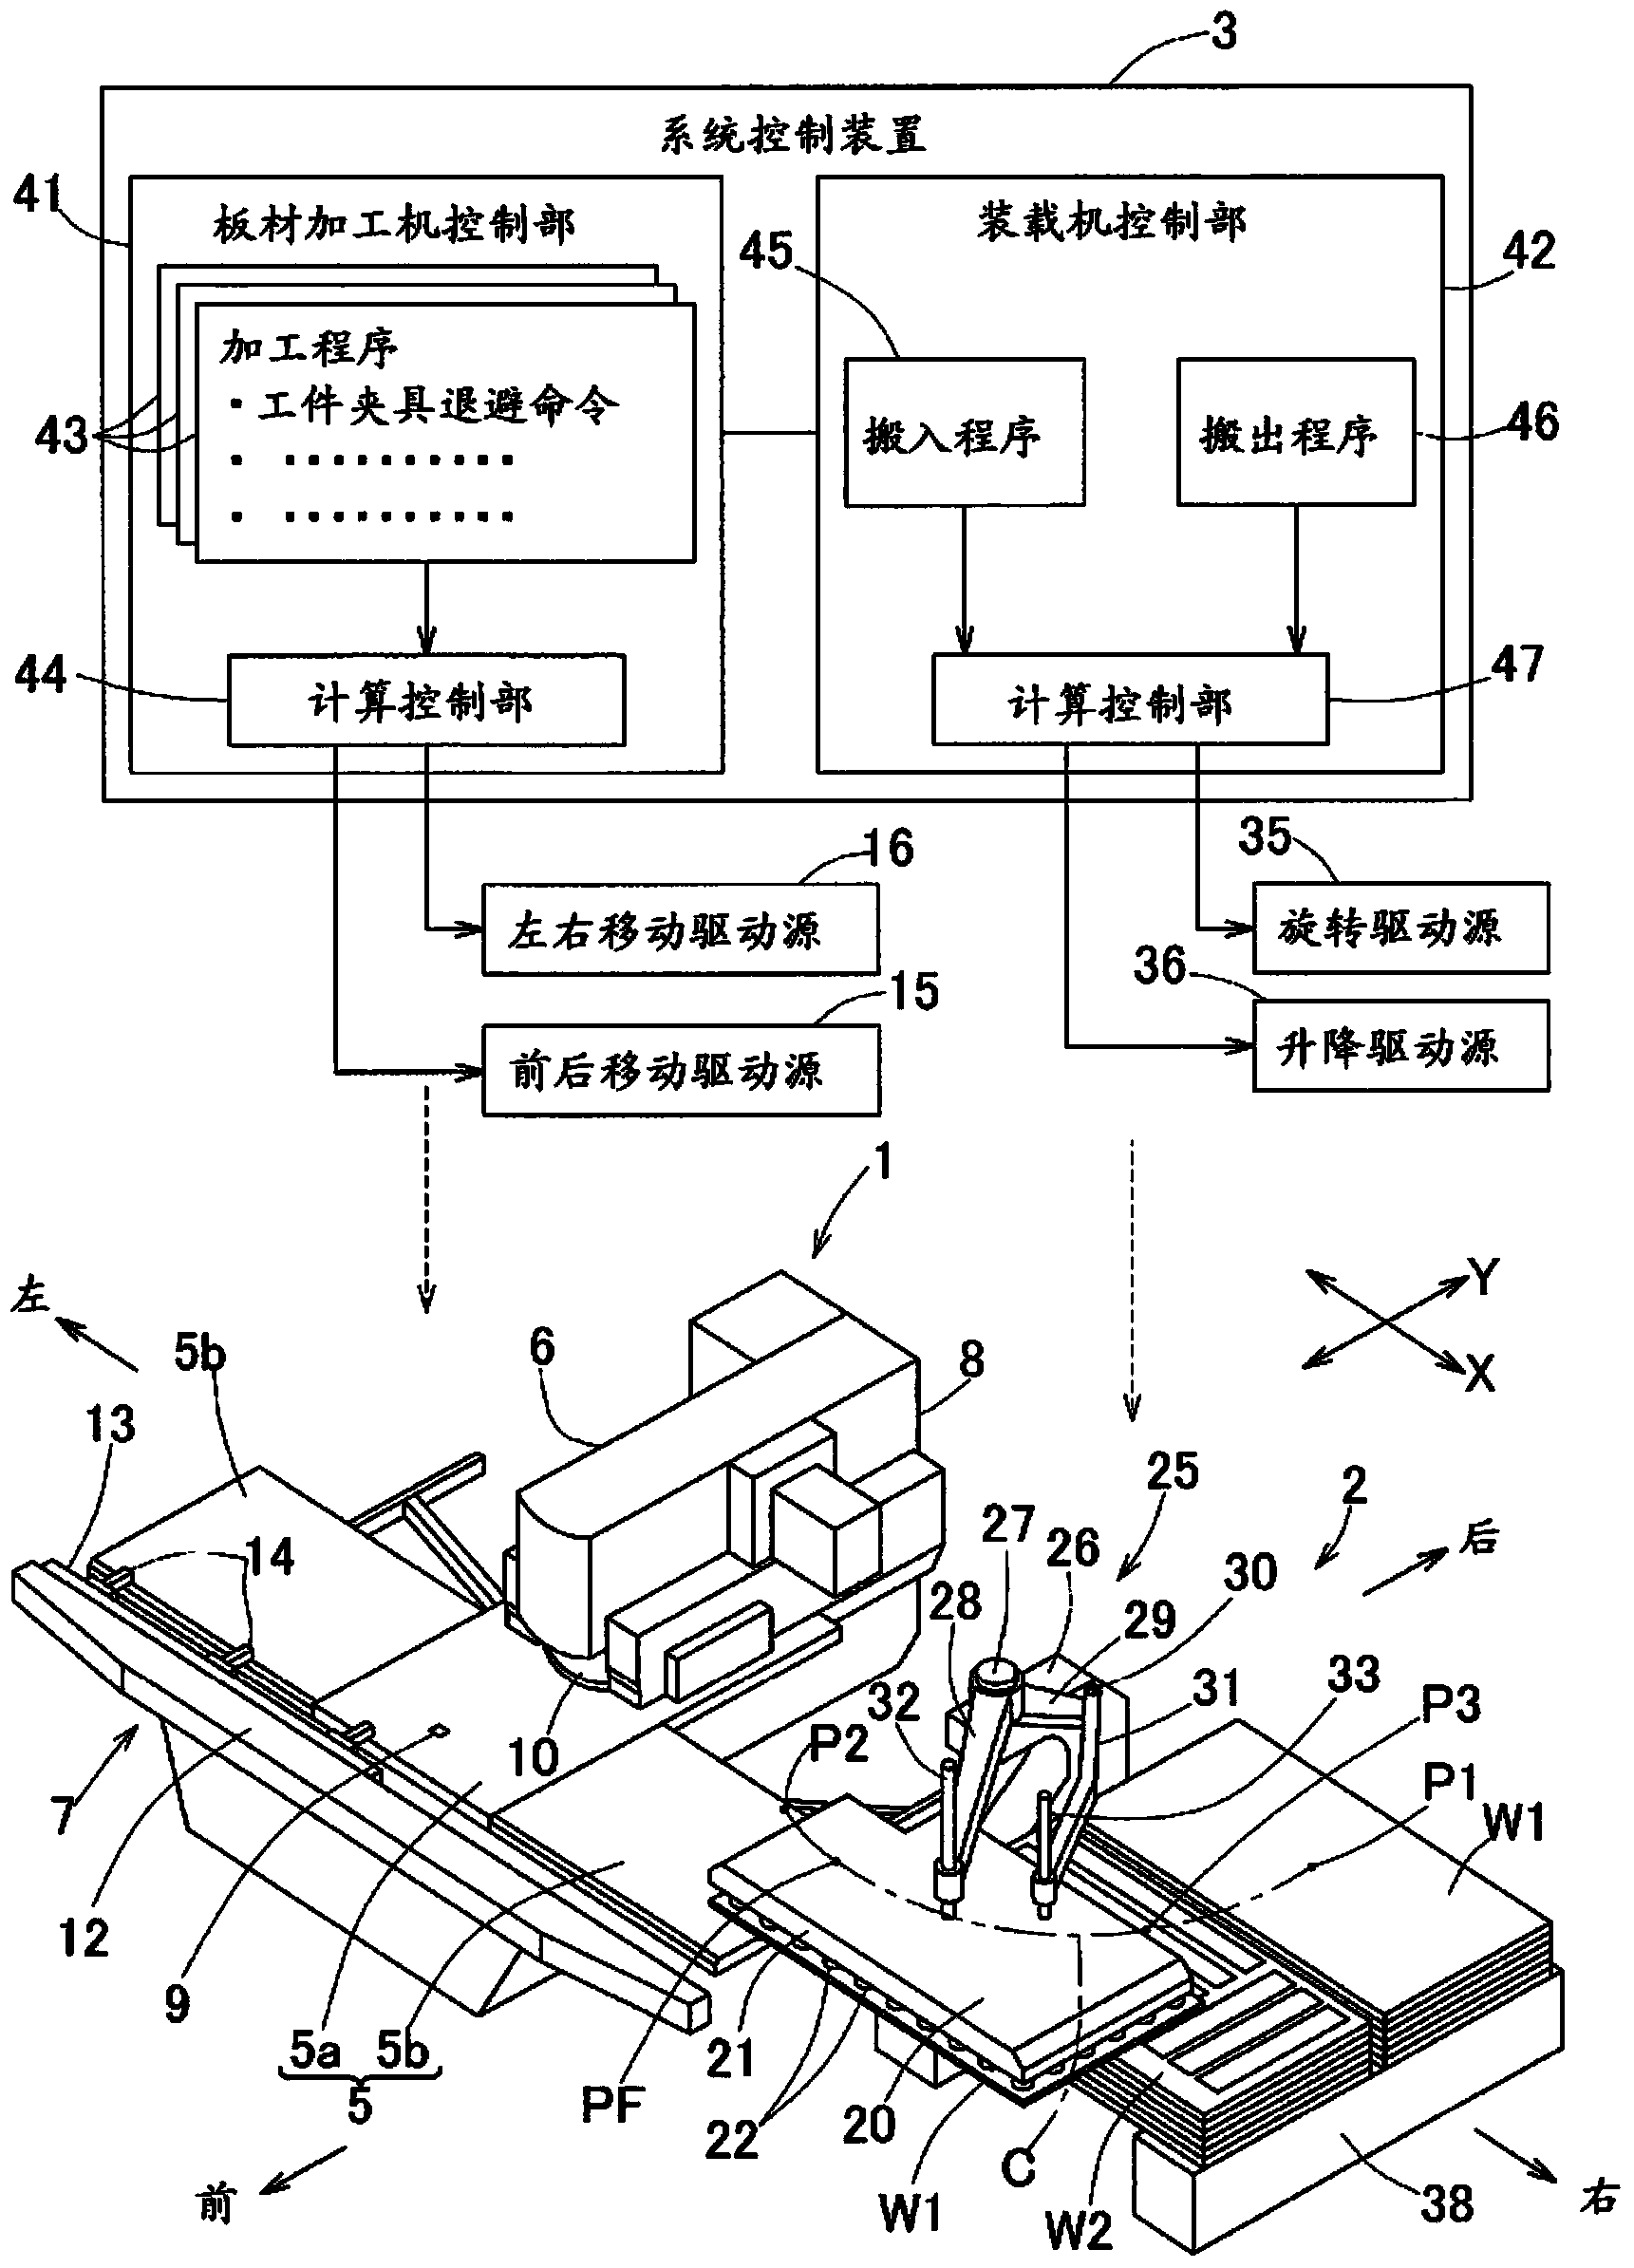 Plate material processing system